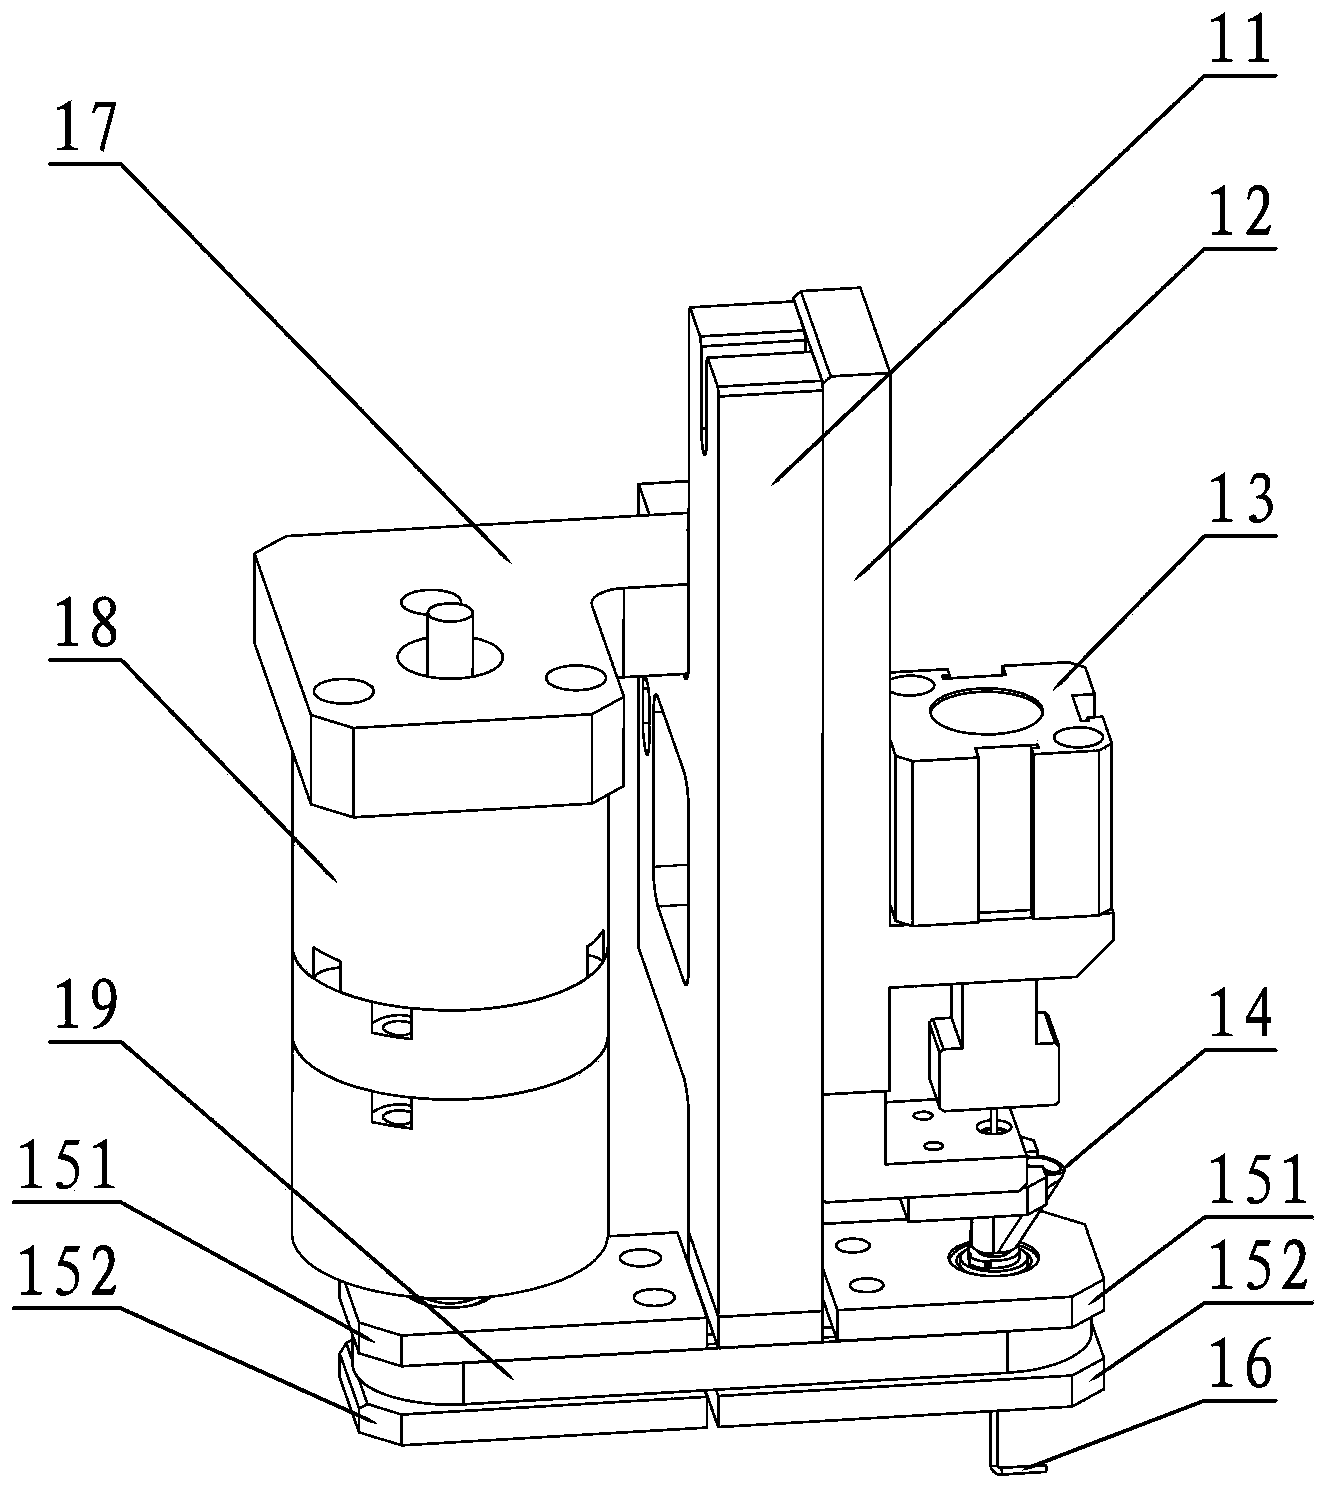 Rotary positioning device for glue-dispensing bent needle head